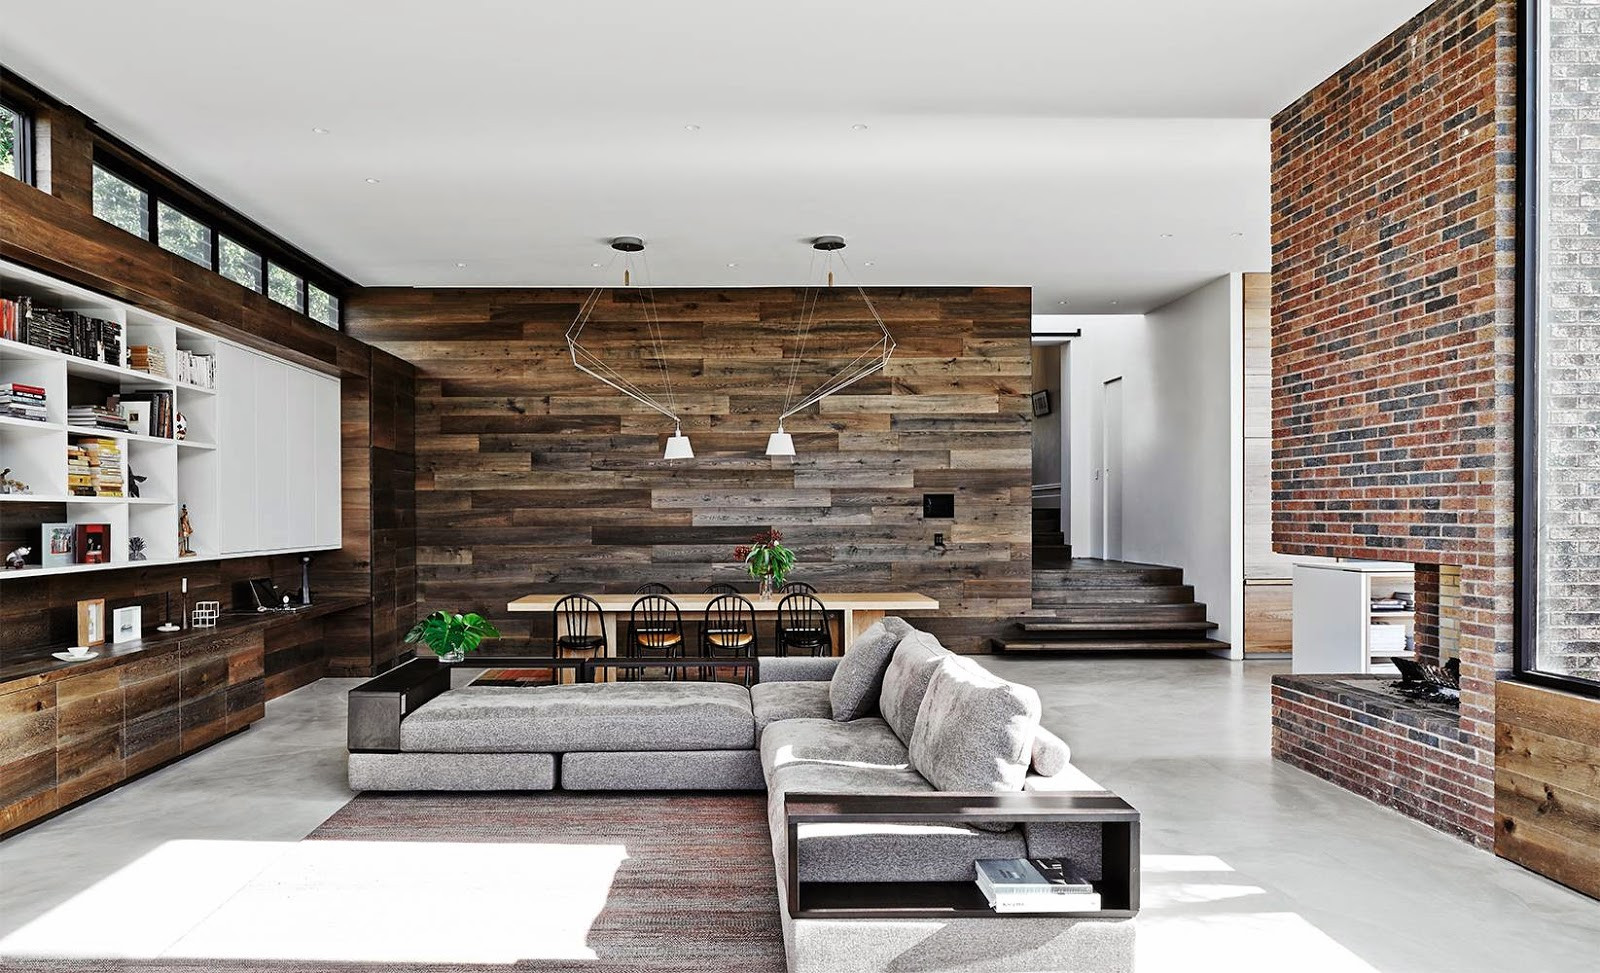 Wood Wall Living Room
 MODERN OPEN FLOOR PLAN MIXING SURFACES